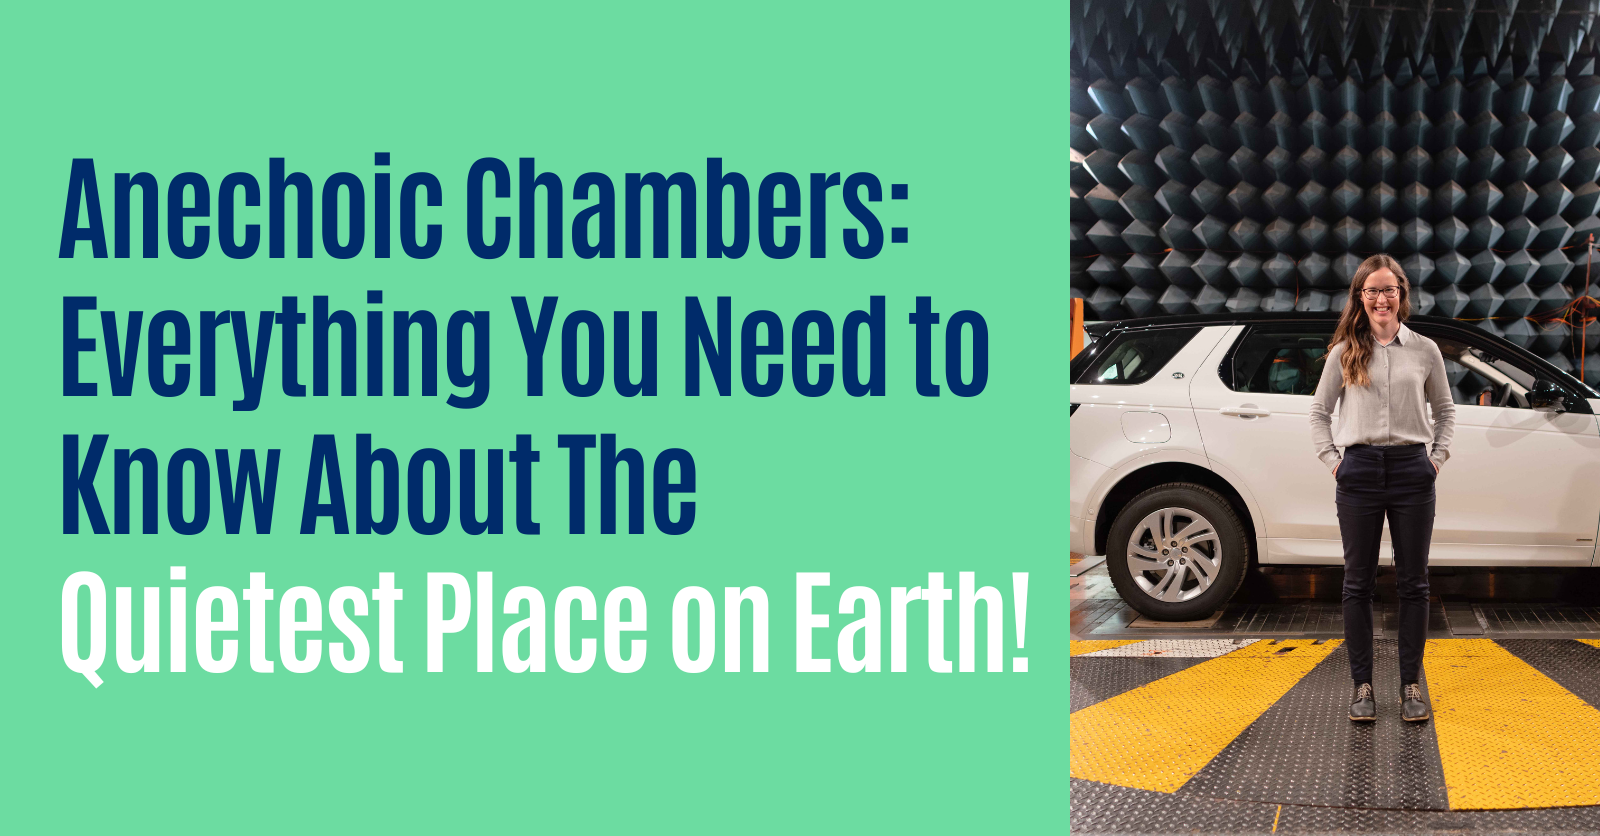 Anechoic-Chambers-Everything-You-Need-to-Know-About-The-Quietest-Place-on-Earth_-1